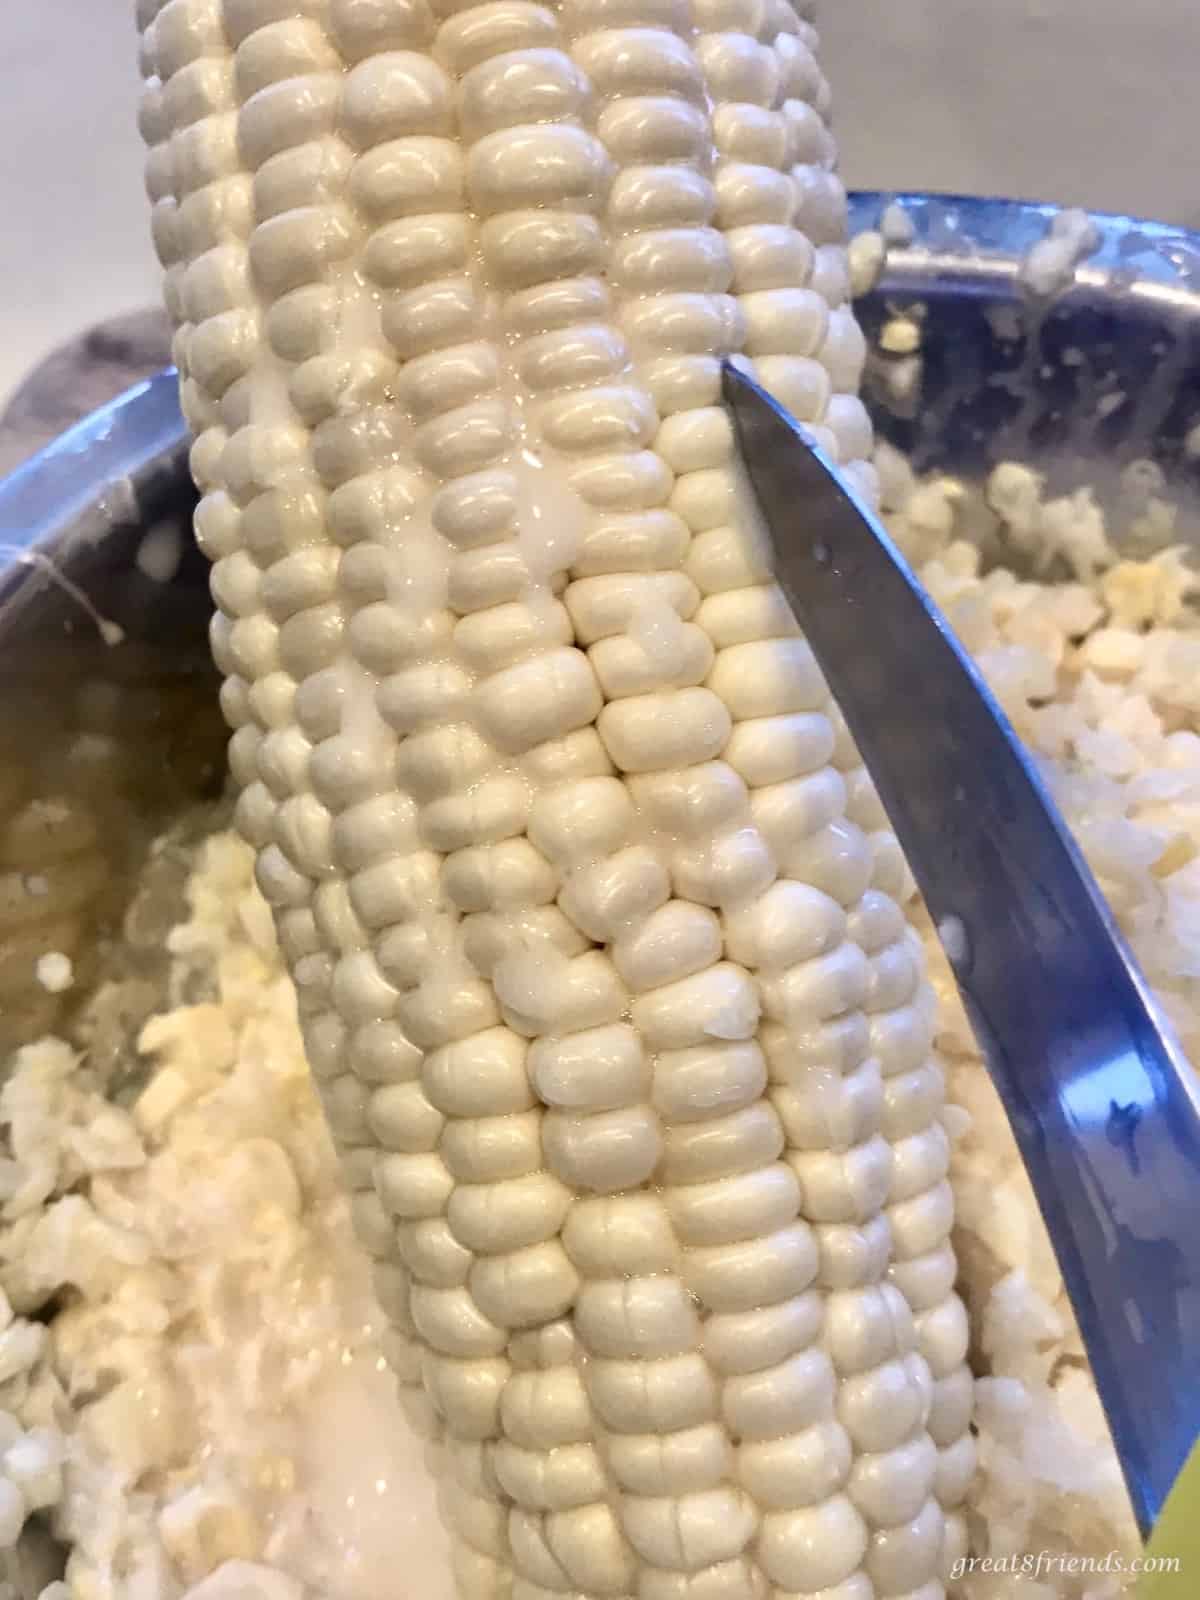 Fresh corn being "milked" with the blade of a sharp knife.